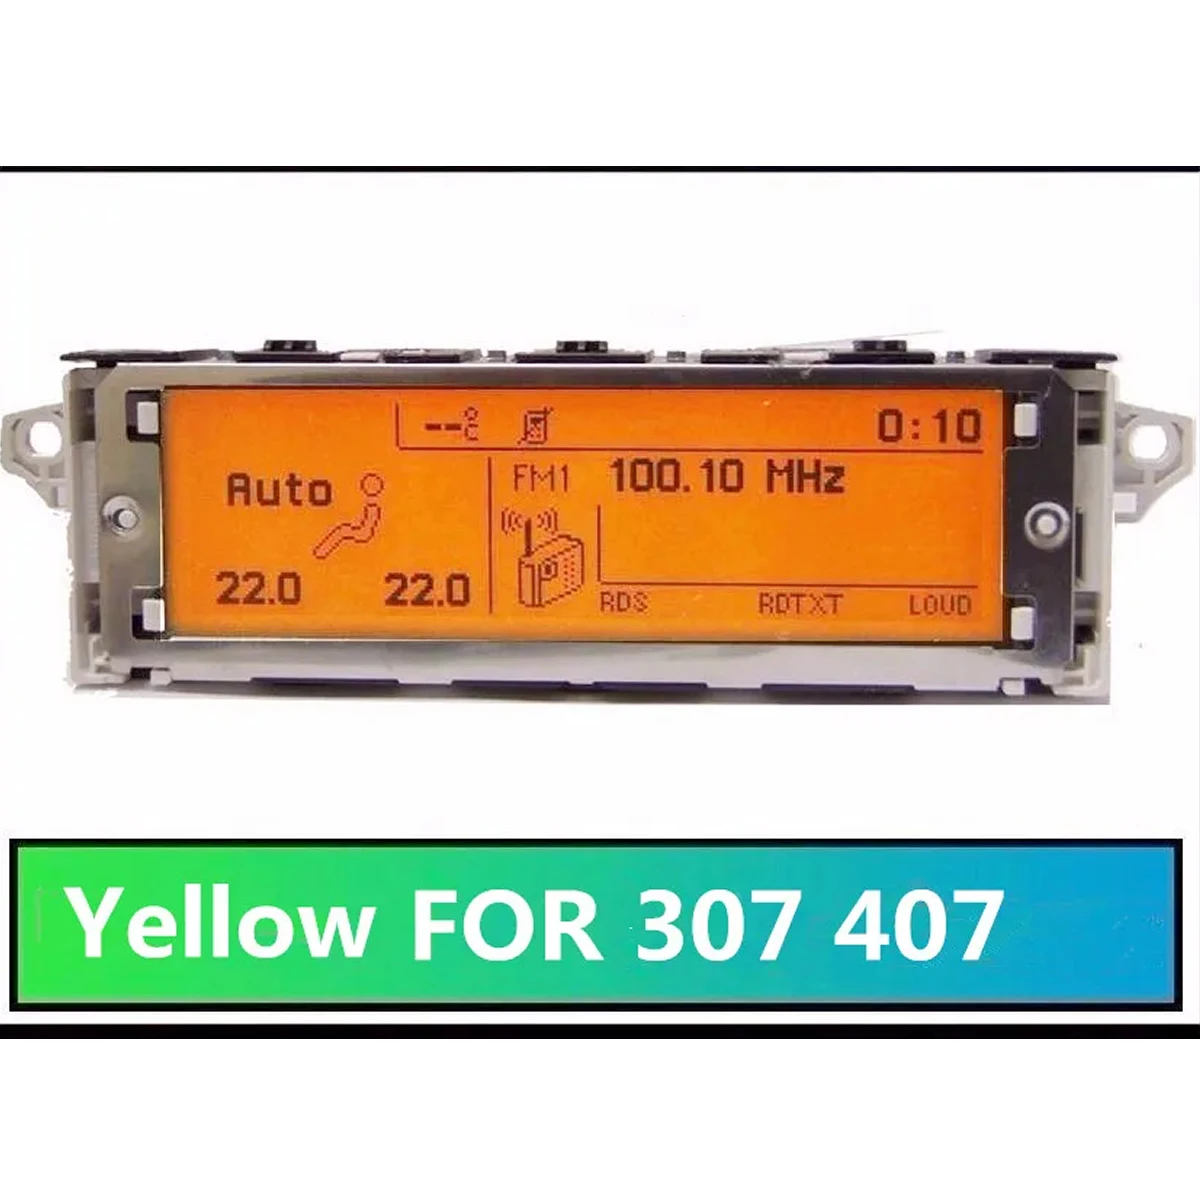 

Brand NEW !!! Screen Support USB + Dual-zone Air Bluetooth Display Monitor Yellow 12 Pin for Peugeot 307 407 408 citroen C4 C5